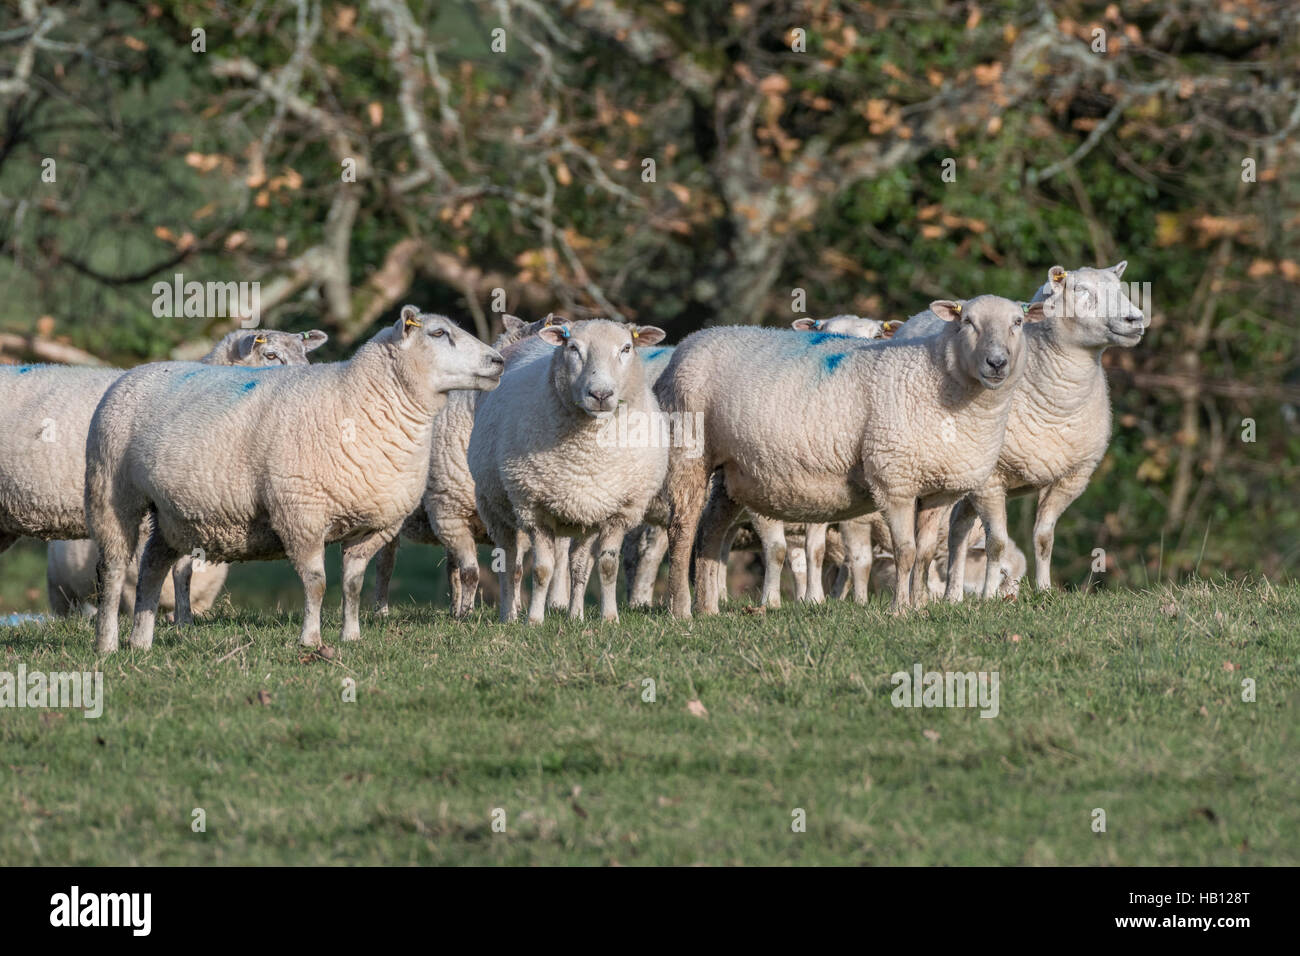 Small part of a flock of Texel-Suffolk crossed sheep. As potential metaphor for herd instinct, sheep-like, customers, and food. Parody of group think. Stock Photo